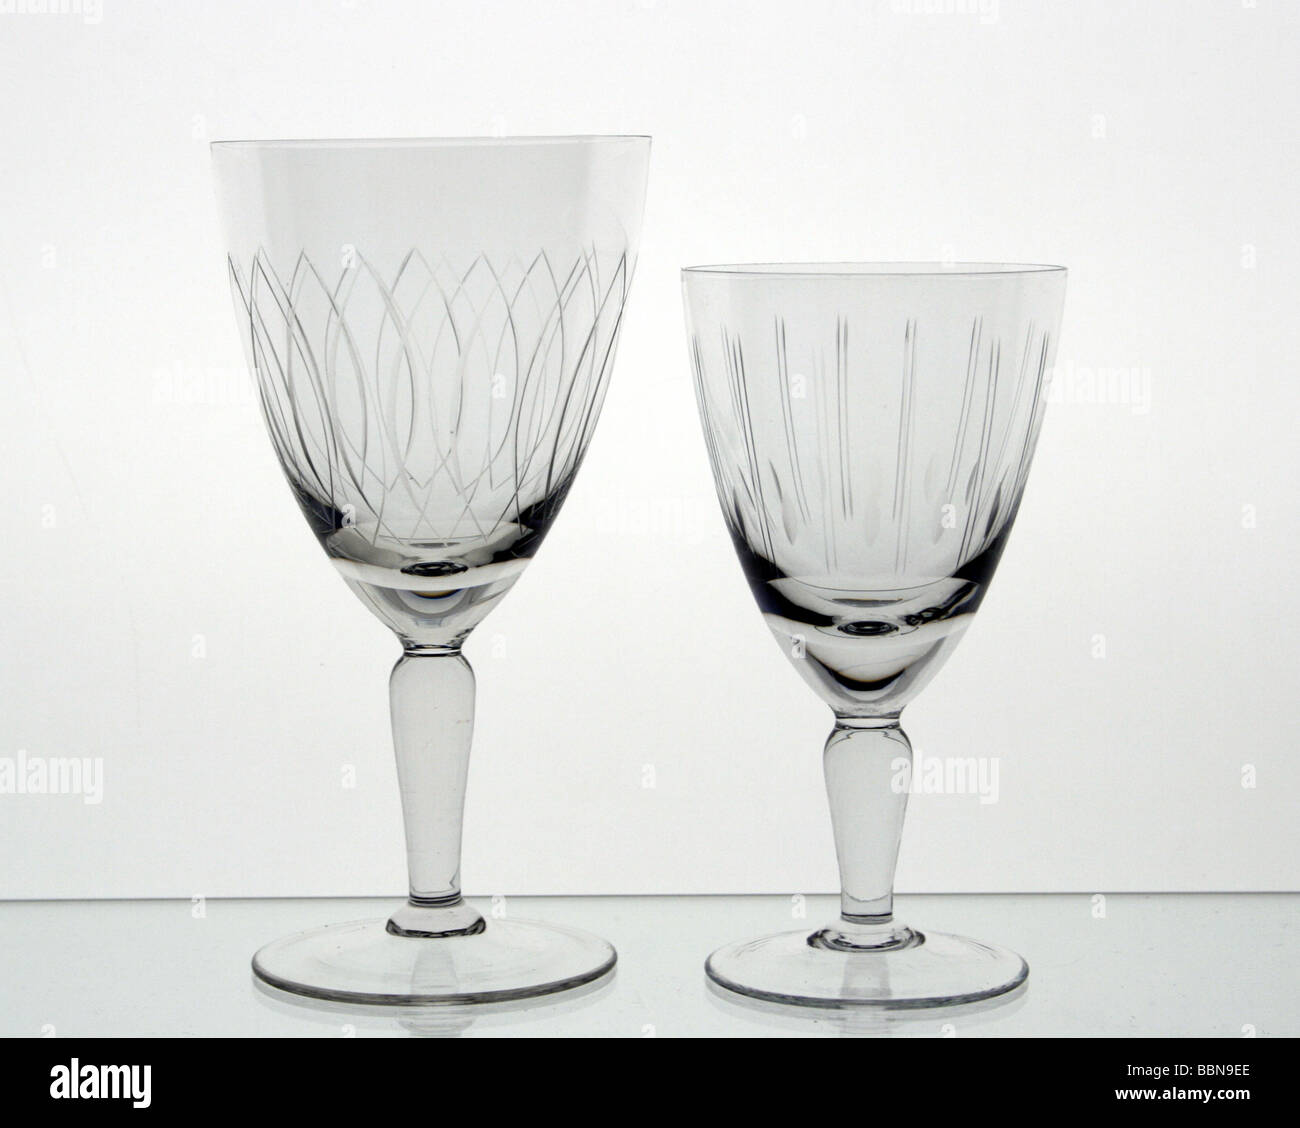 glass, vessels, two glasses from glass series No 10 002, shell form with  line cutting, made by VEB Glasfabrik Weisswasser, Bärenhütte, GDR, 1950,  historic, historical, 20th century, East-Germany, East Germany, DDR,  industrial